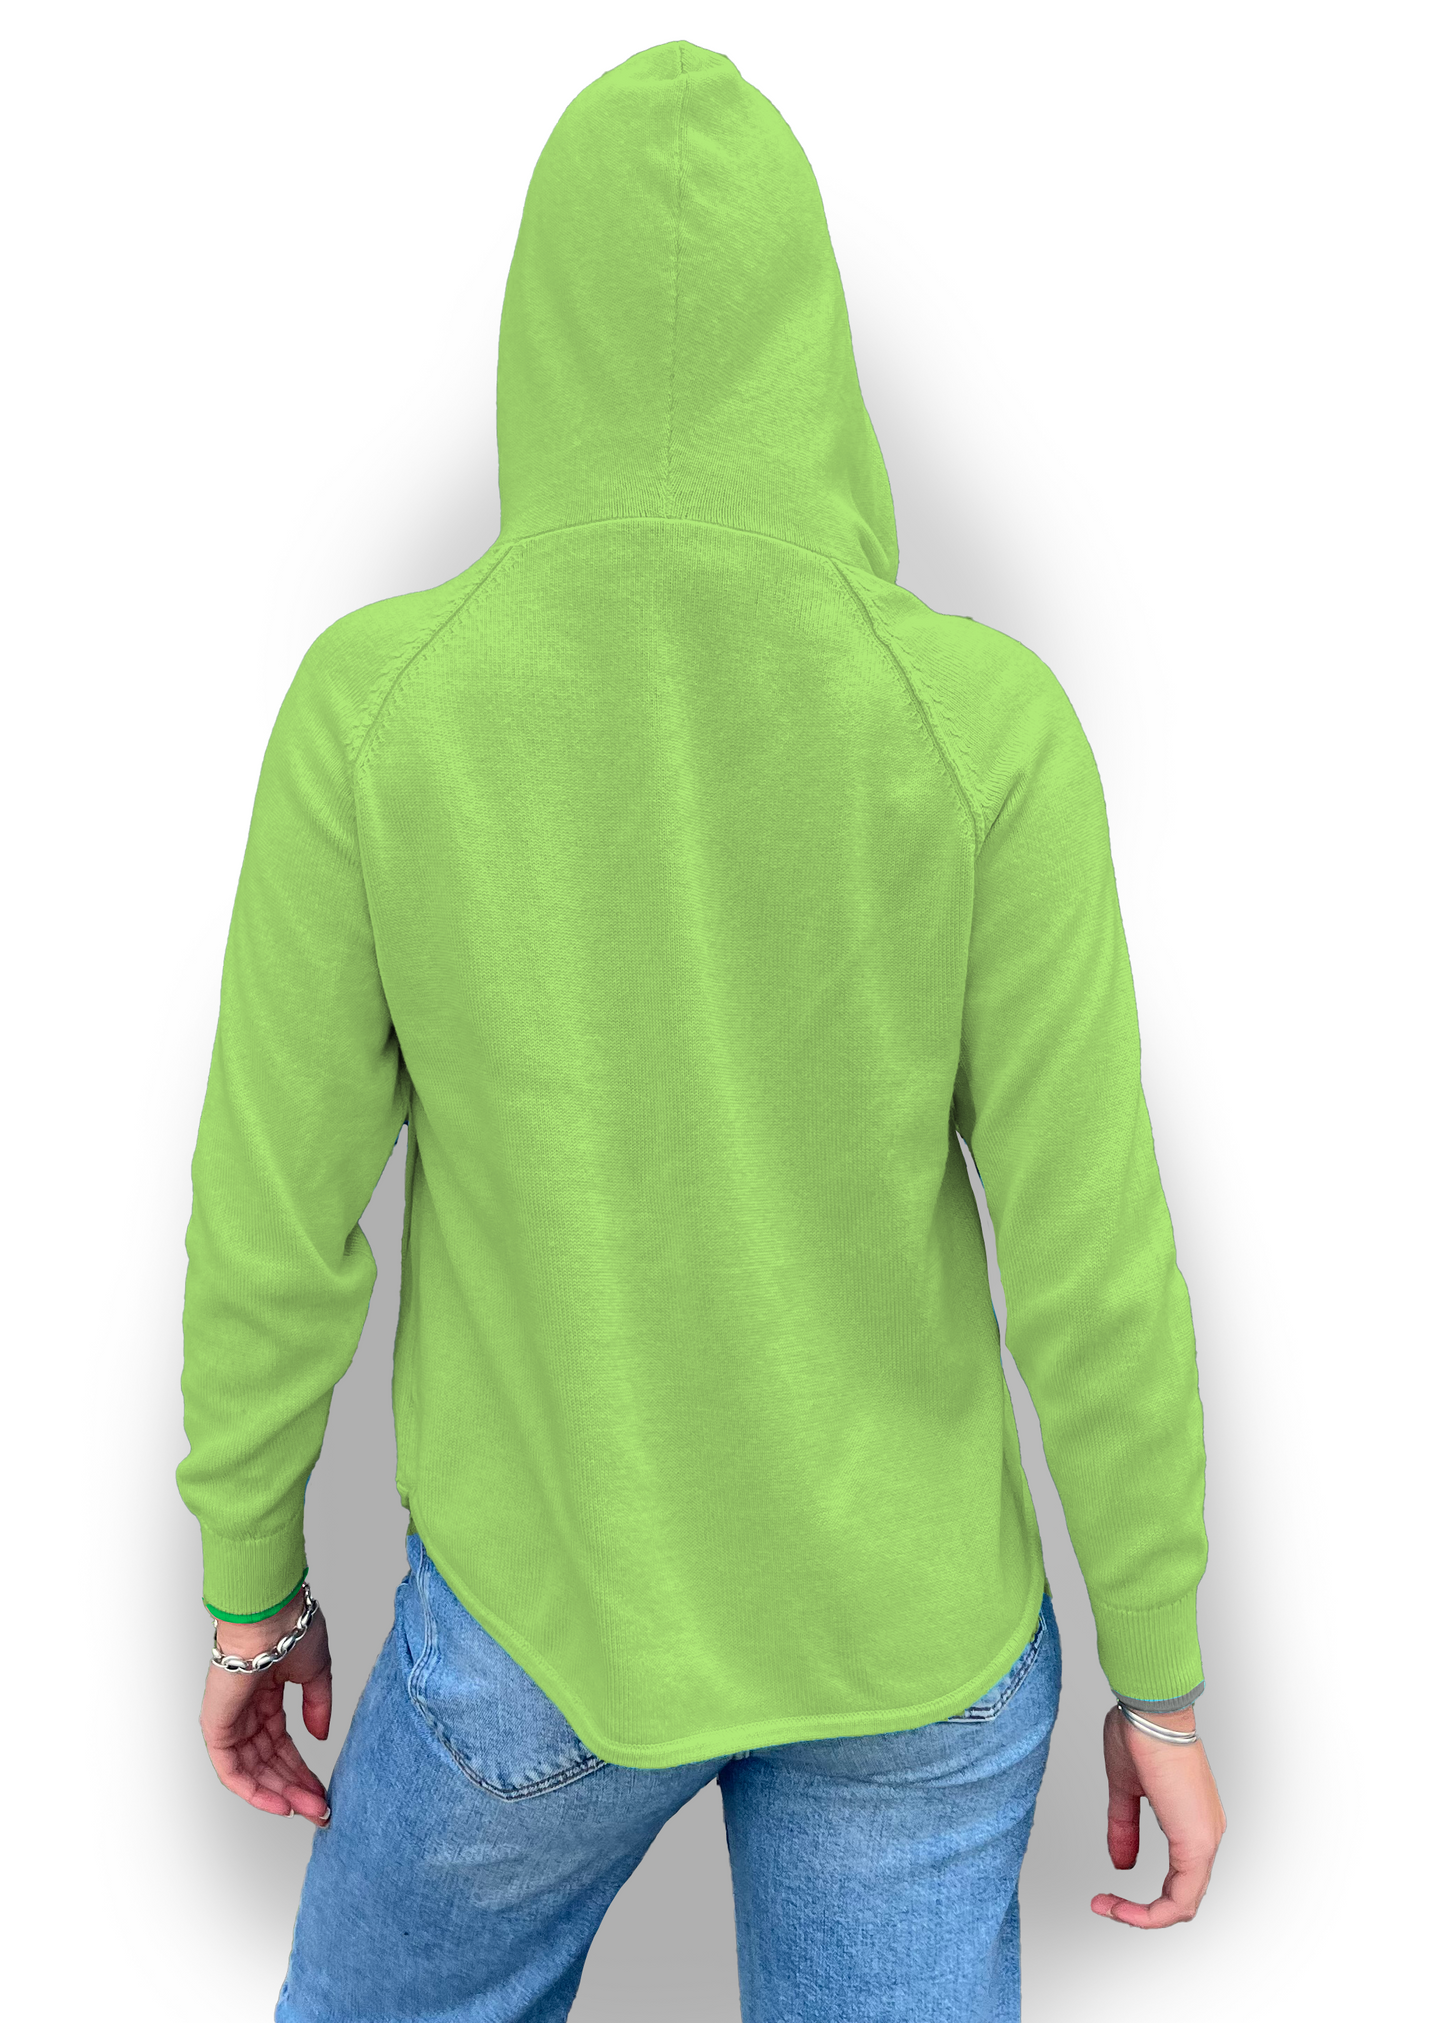 Zaket & Plover Zaket & Plover - Chunky Cotton Hoodie - Celery available at The Good Life Boutique